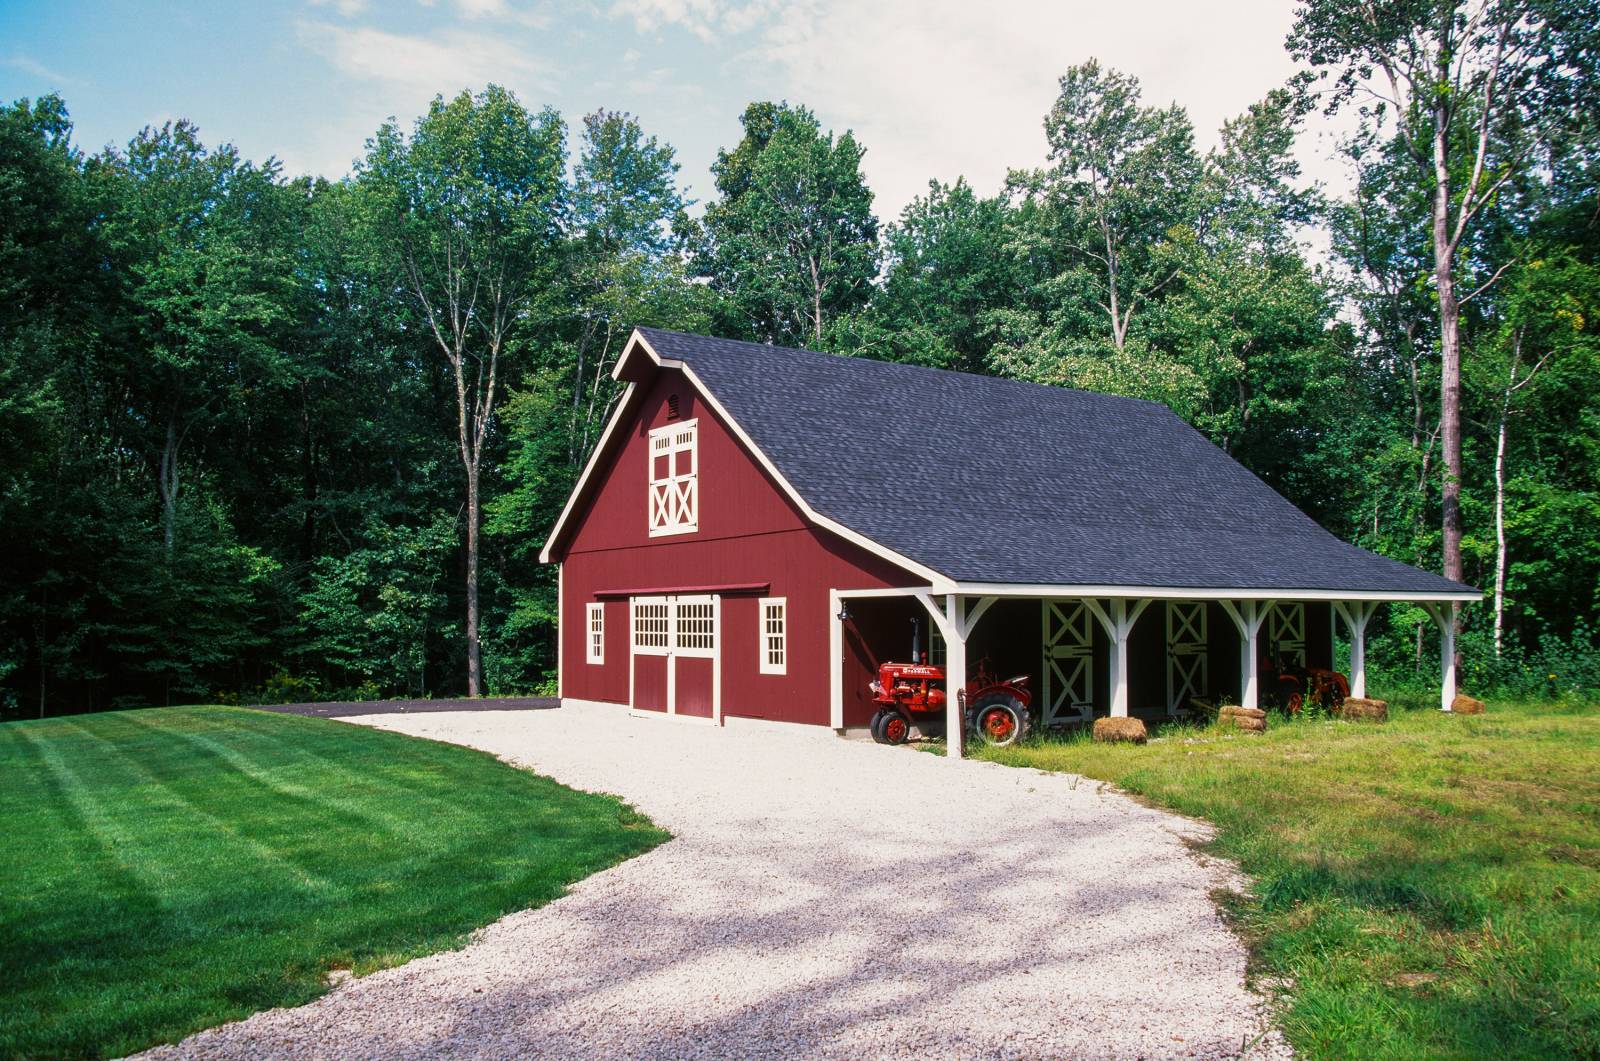 Post & Beam Barn at the End of a Gravel Driveway